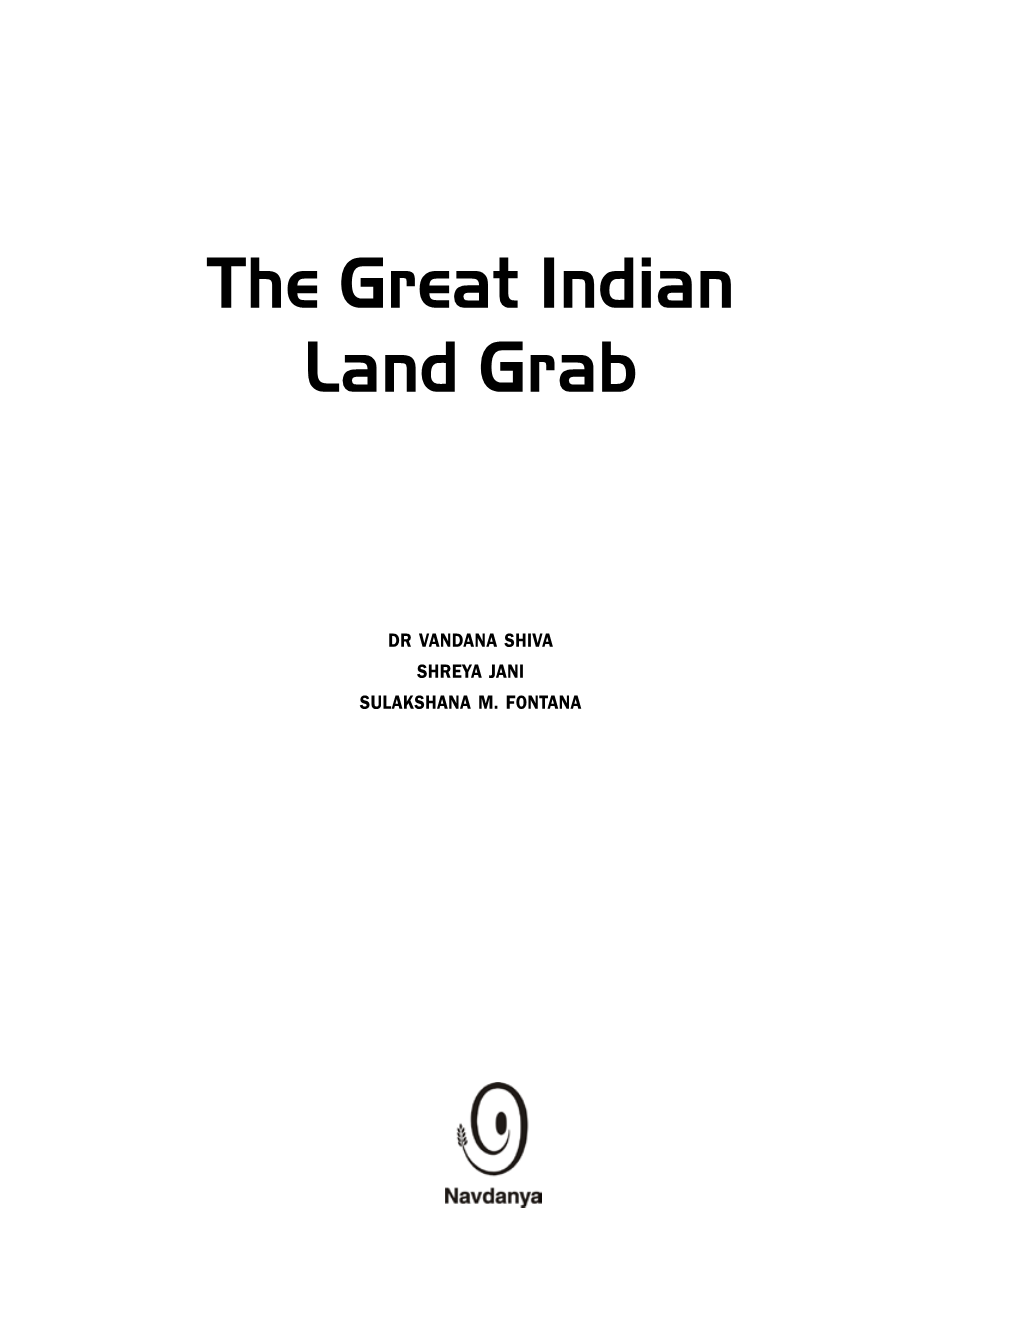 The Great Indian Land Grab